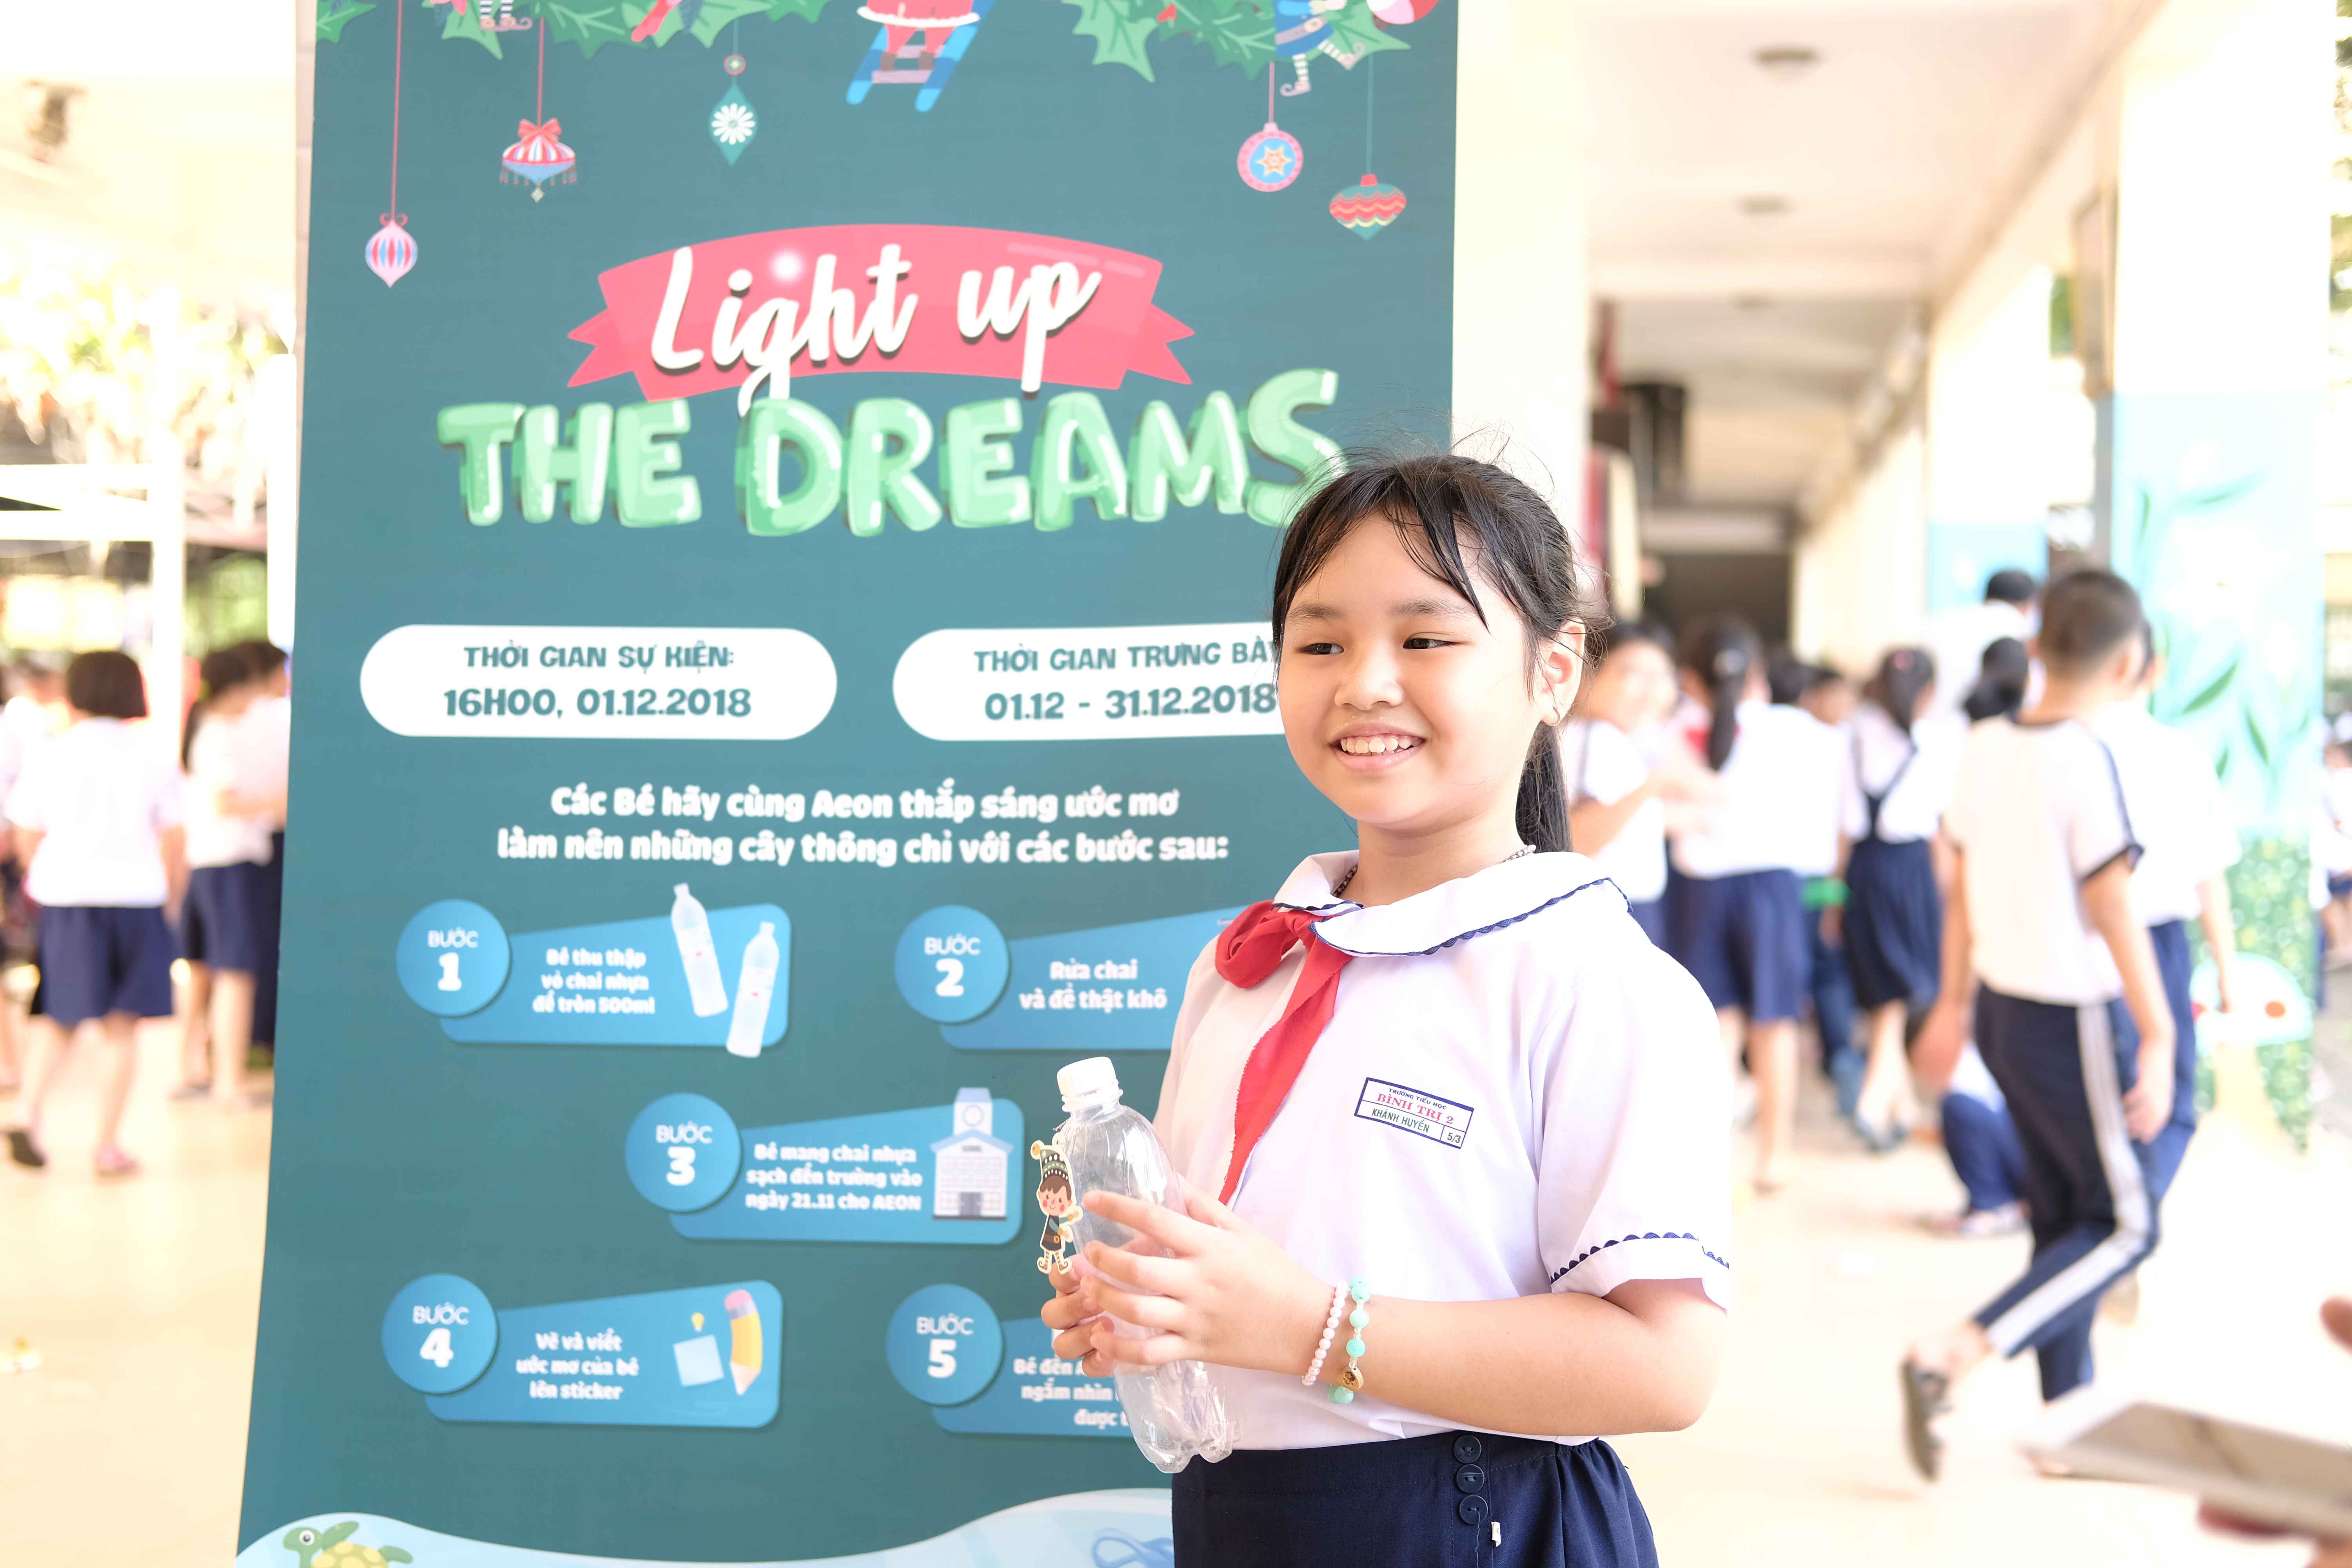 "LIGHT UP THE DREAMS" WITH SMALL ACTIONS - AEON Việt Nam